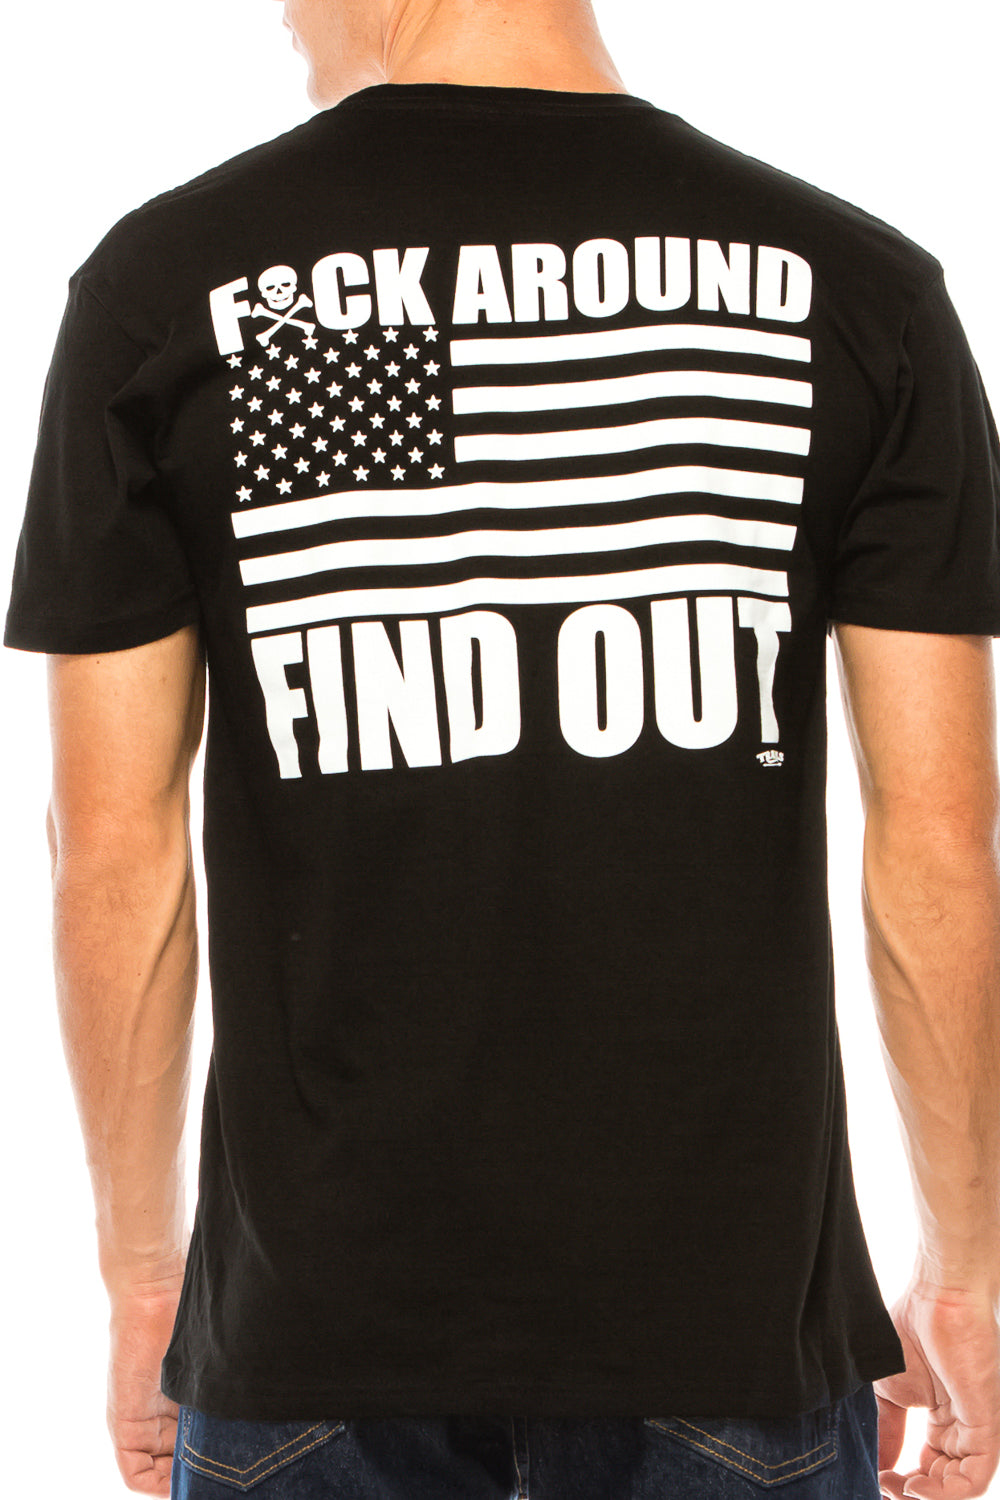 F*CK AROUND FIND OUT T SHIRT - Trailsclothing.com